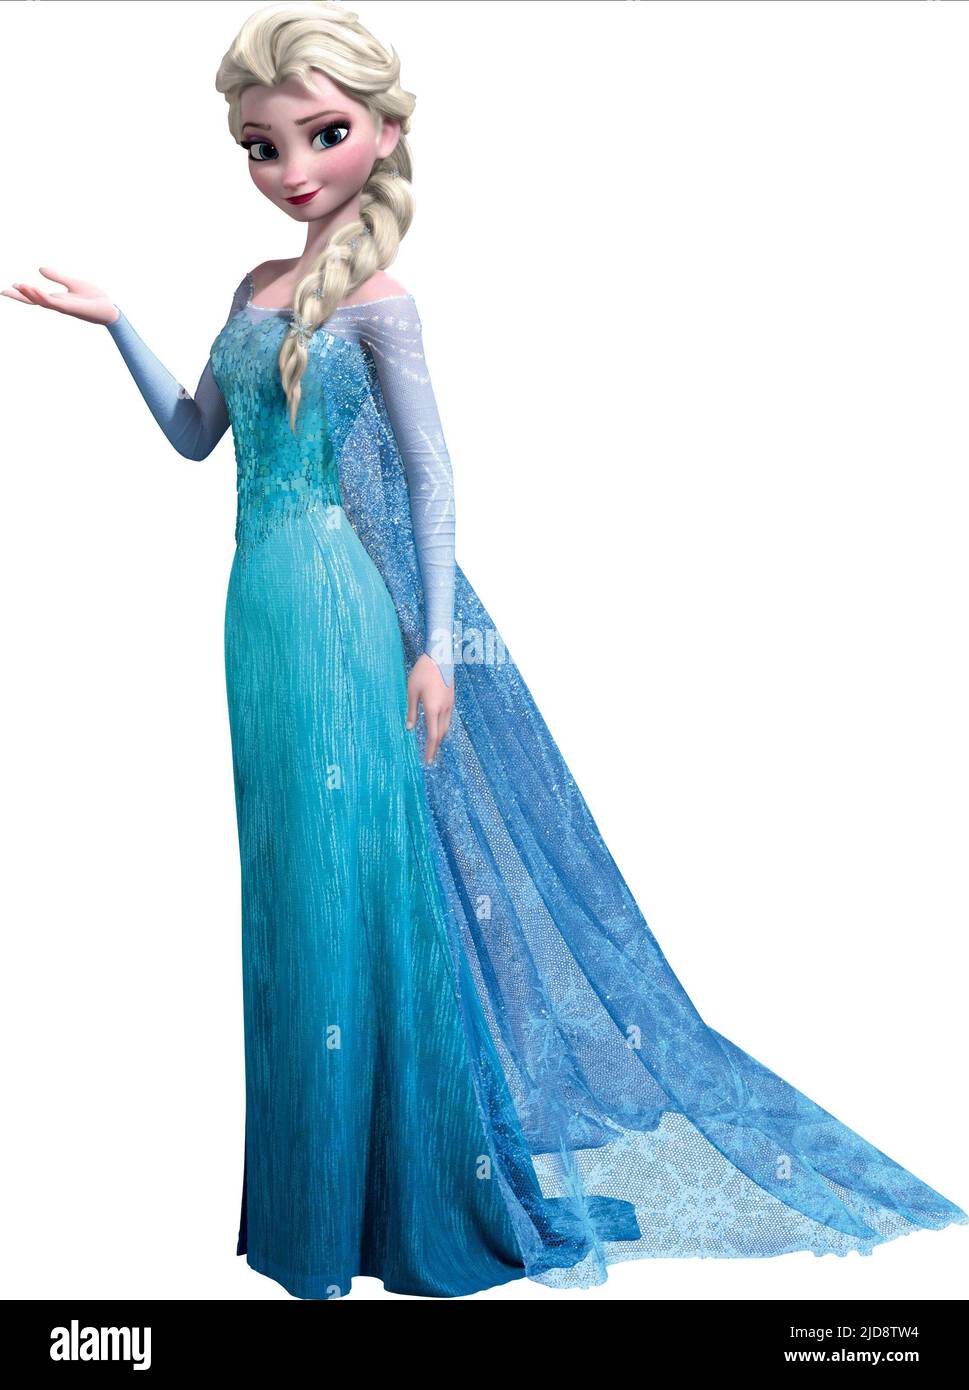 The Ultimate Collection of Elsa Images: Over 999 Stunning Elsa Images in Full 4K Quality